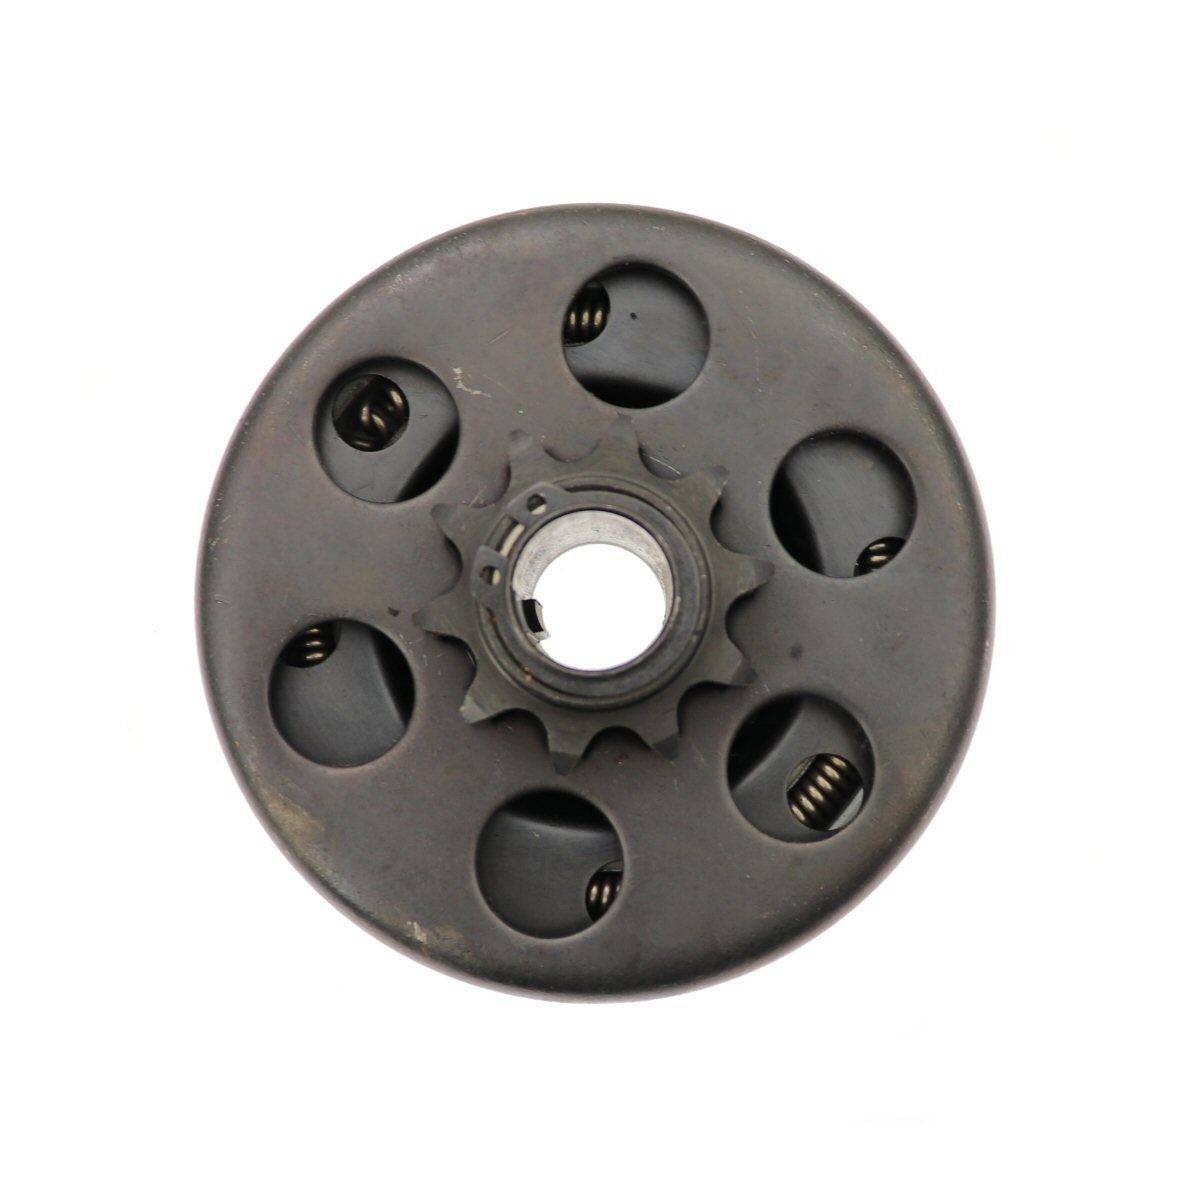 3/4″ Clutch for GX200 and Predator 212 Engines